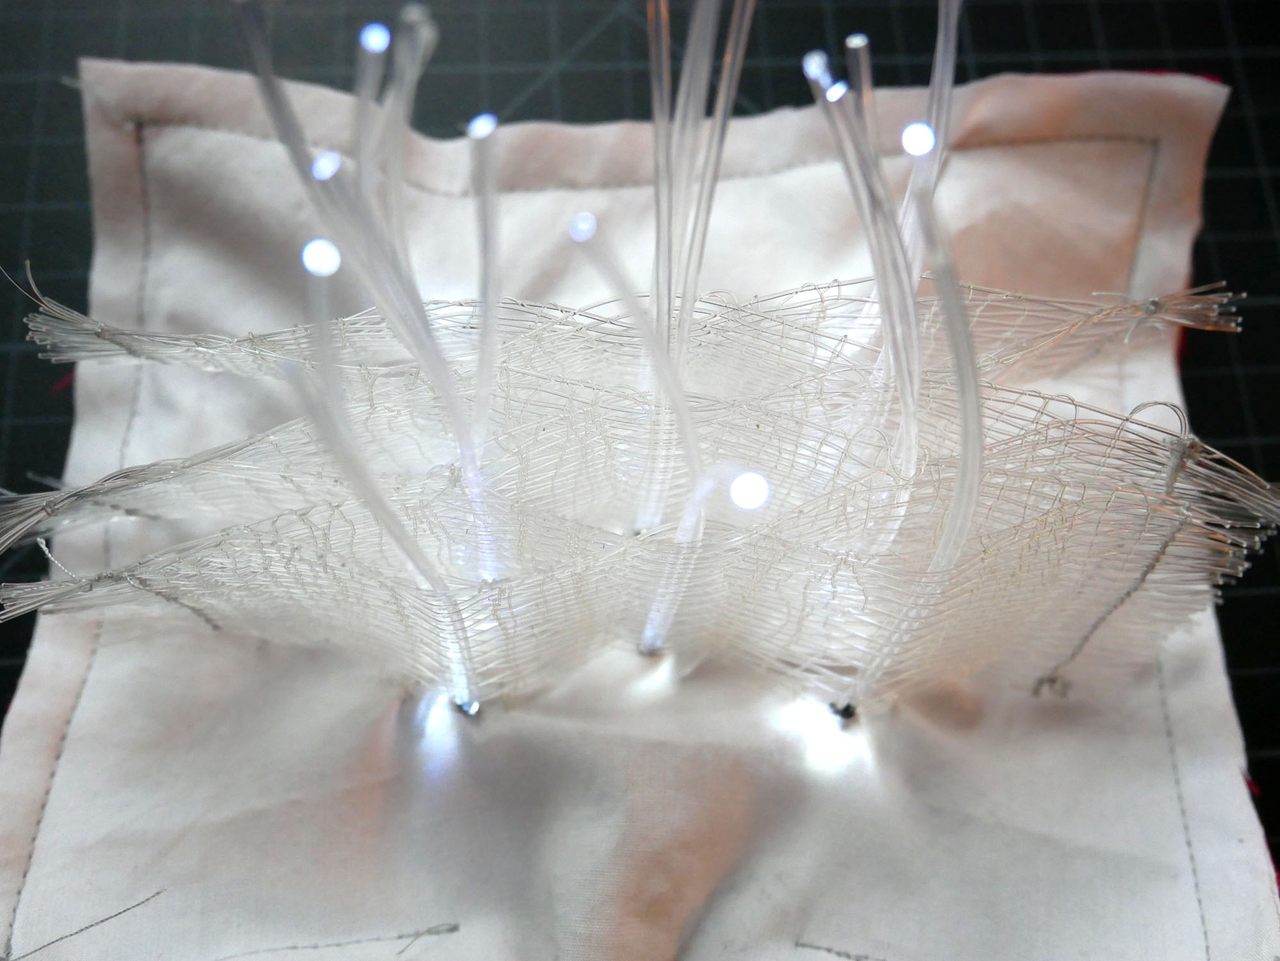 Conductive Thread, Soft Circuits, and Wearables (E-Textiles) 